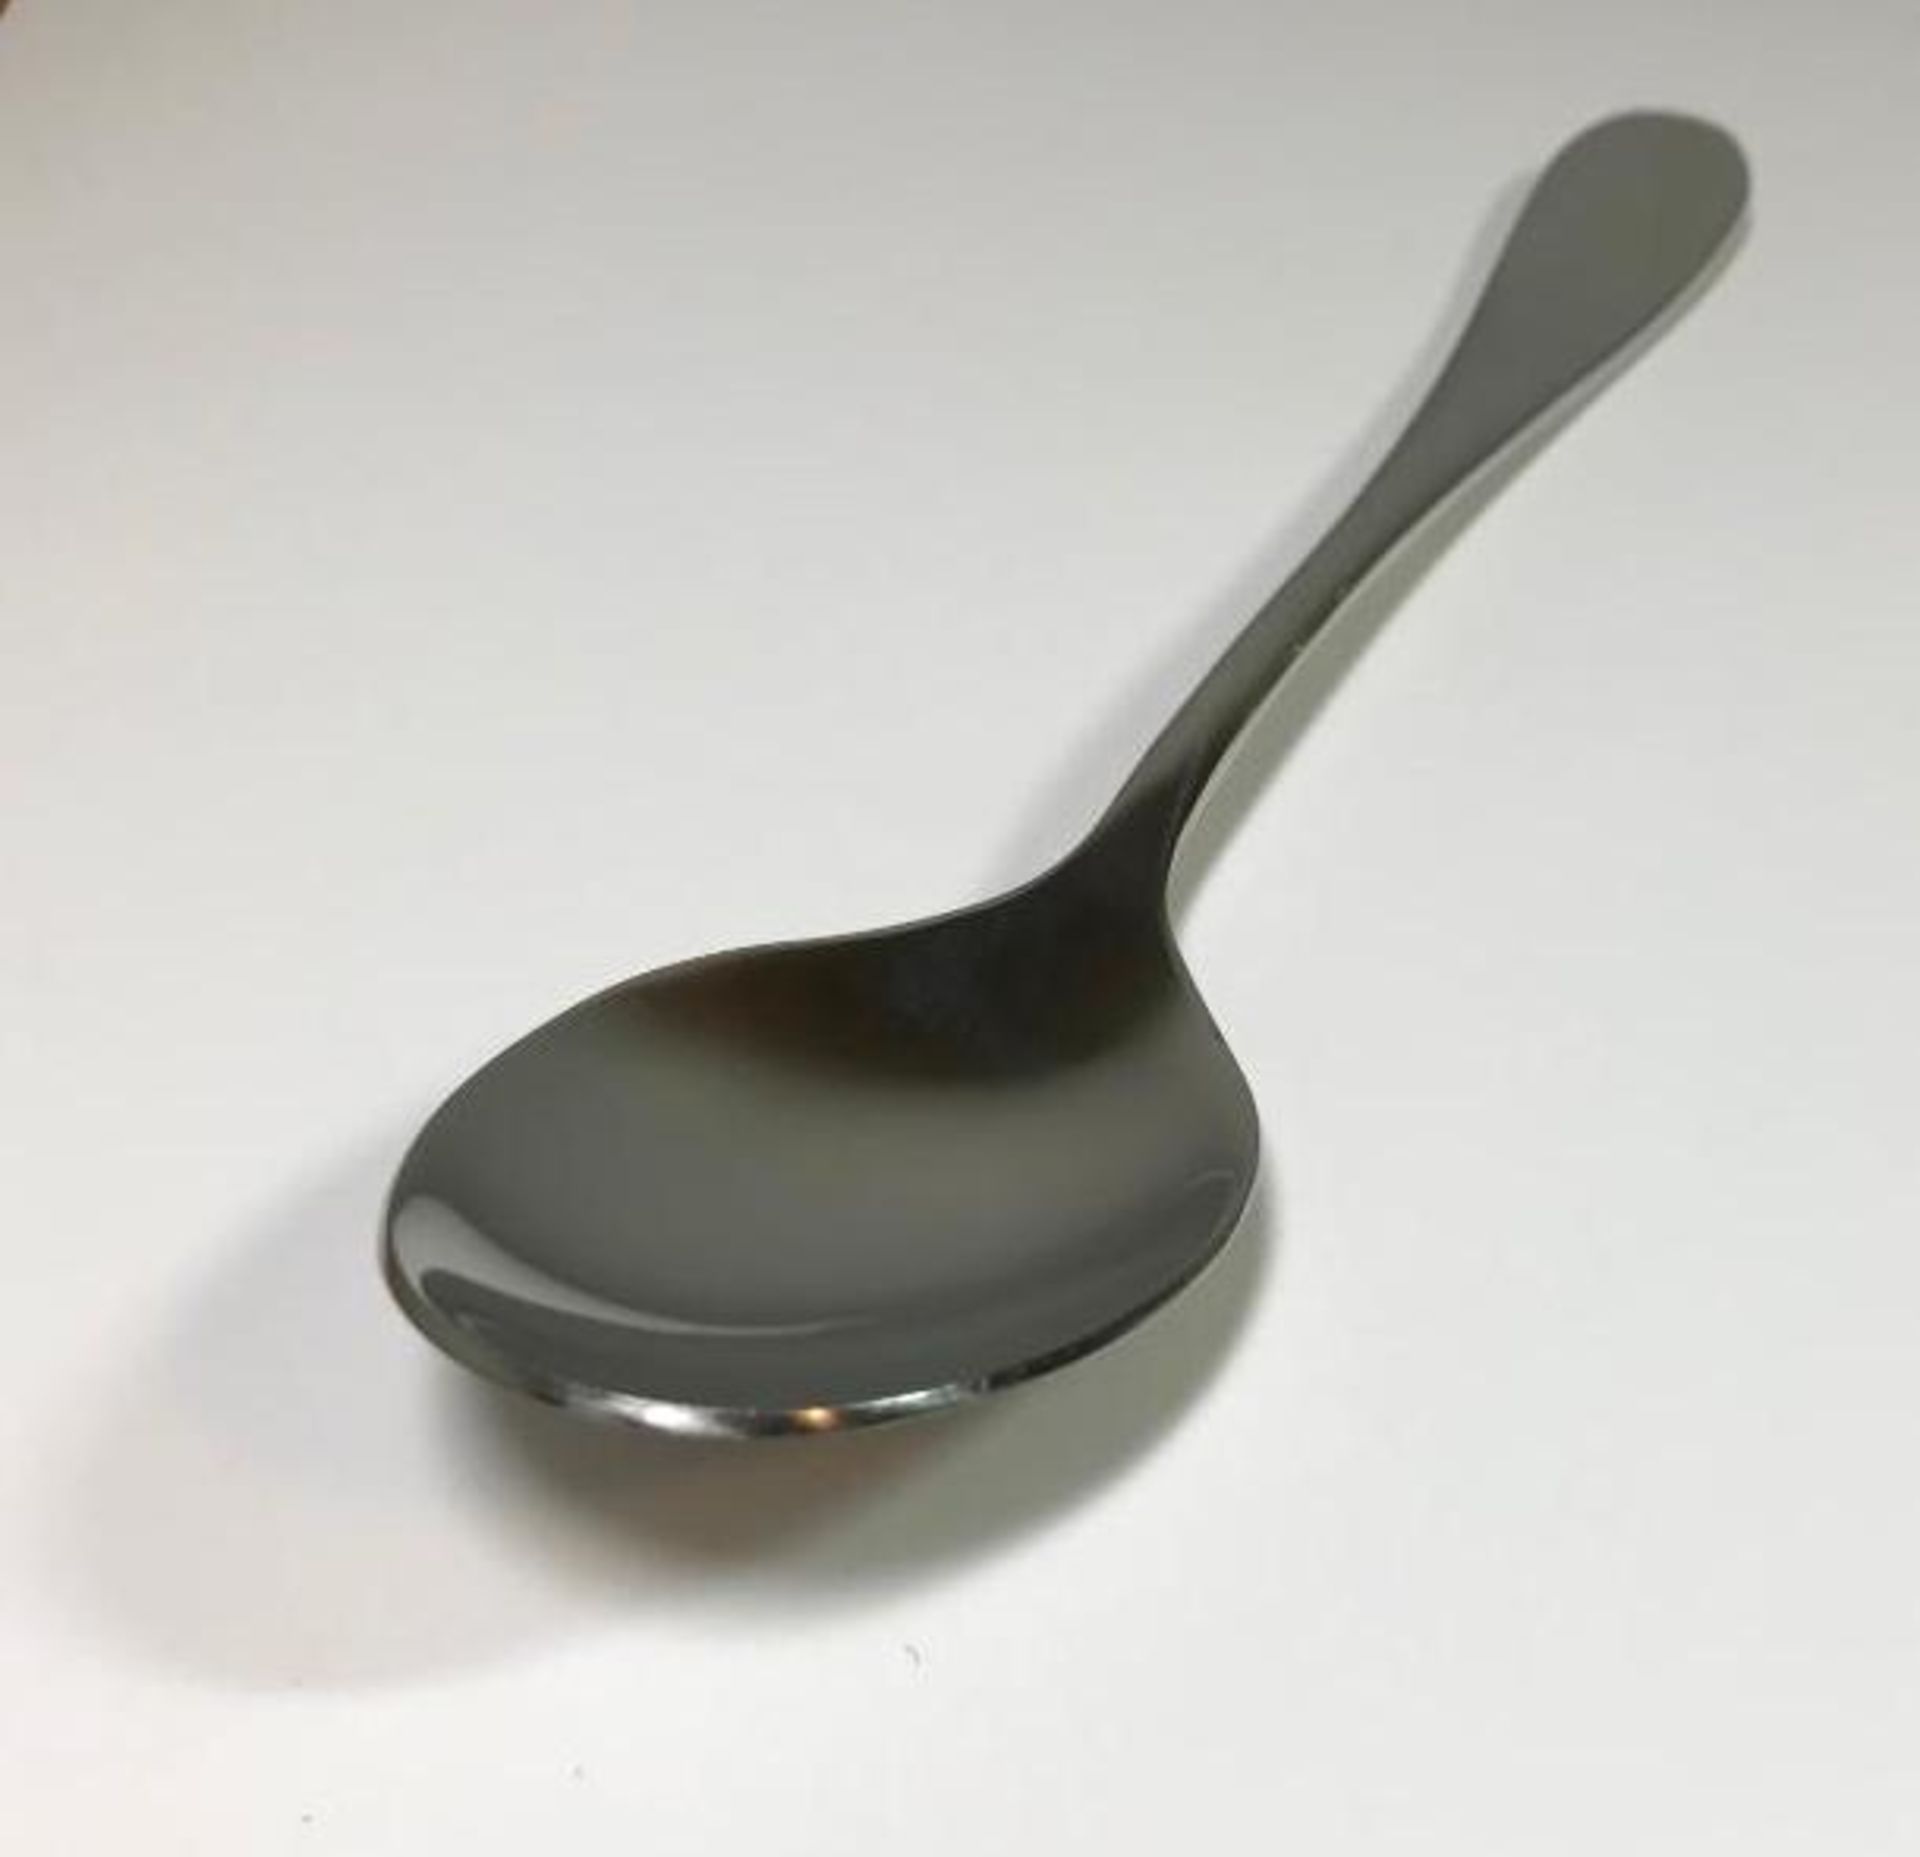 DUDSON EQUUS 8.25" TABLE/SERVING SPOON - 12/CASE - NEW - Image 2 of 4